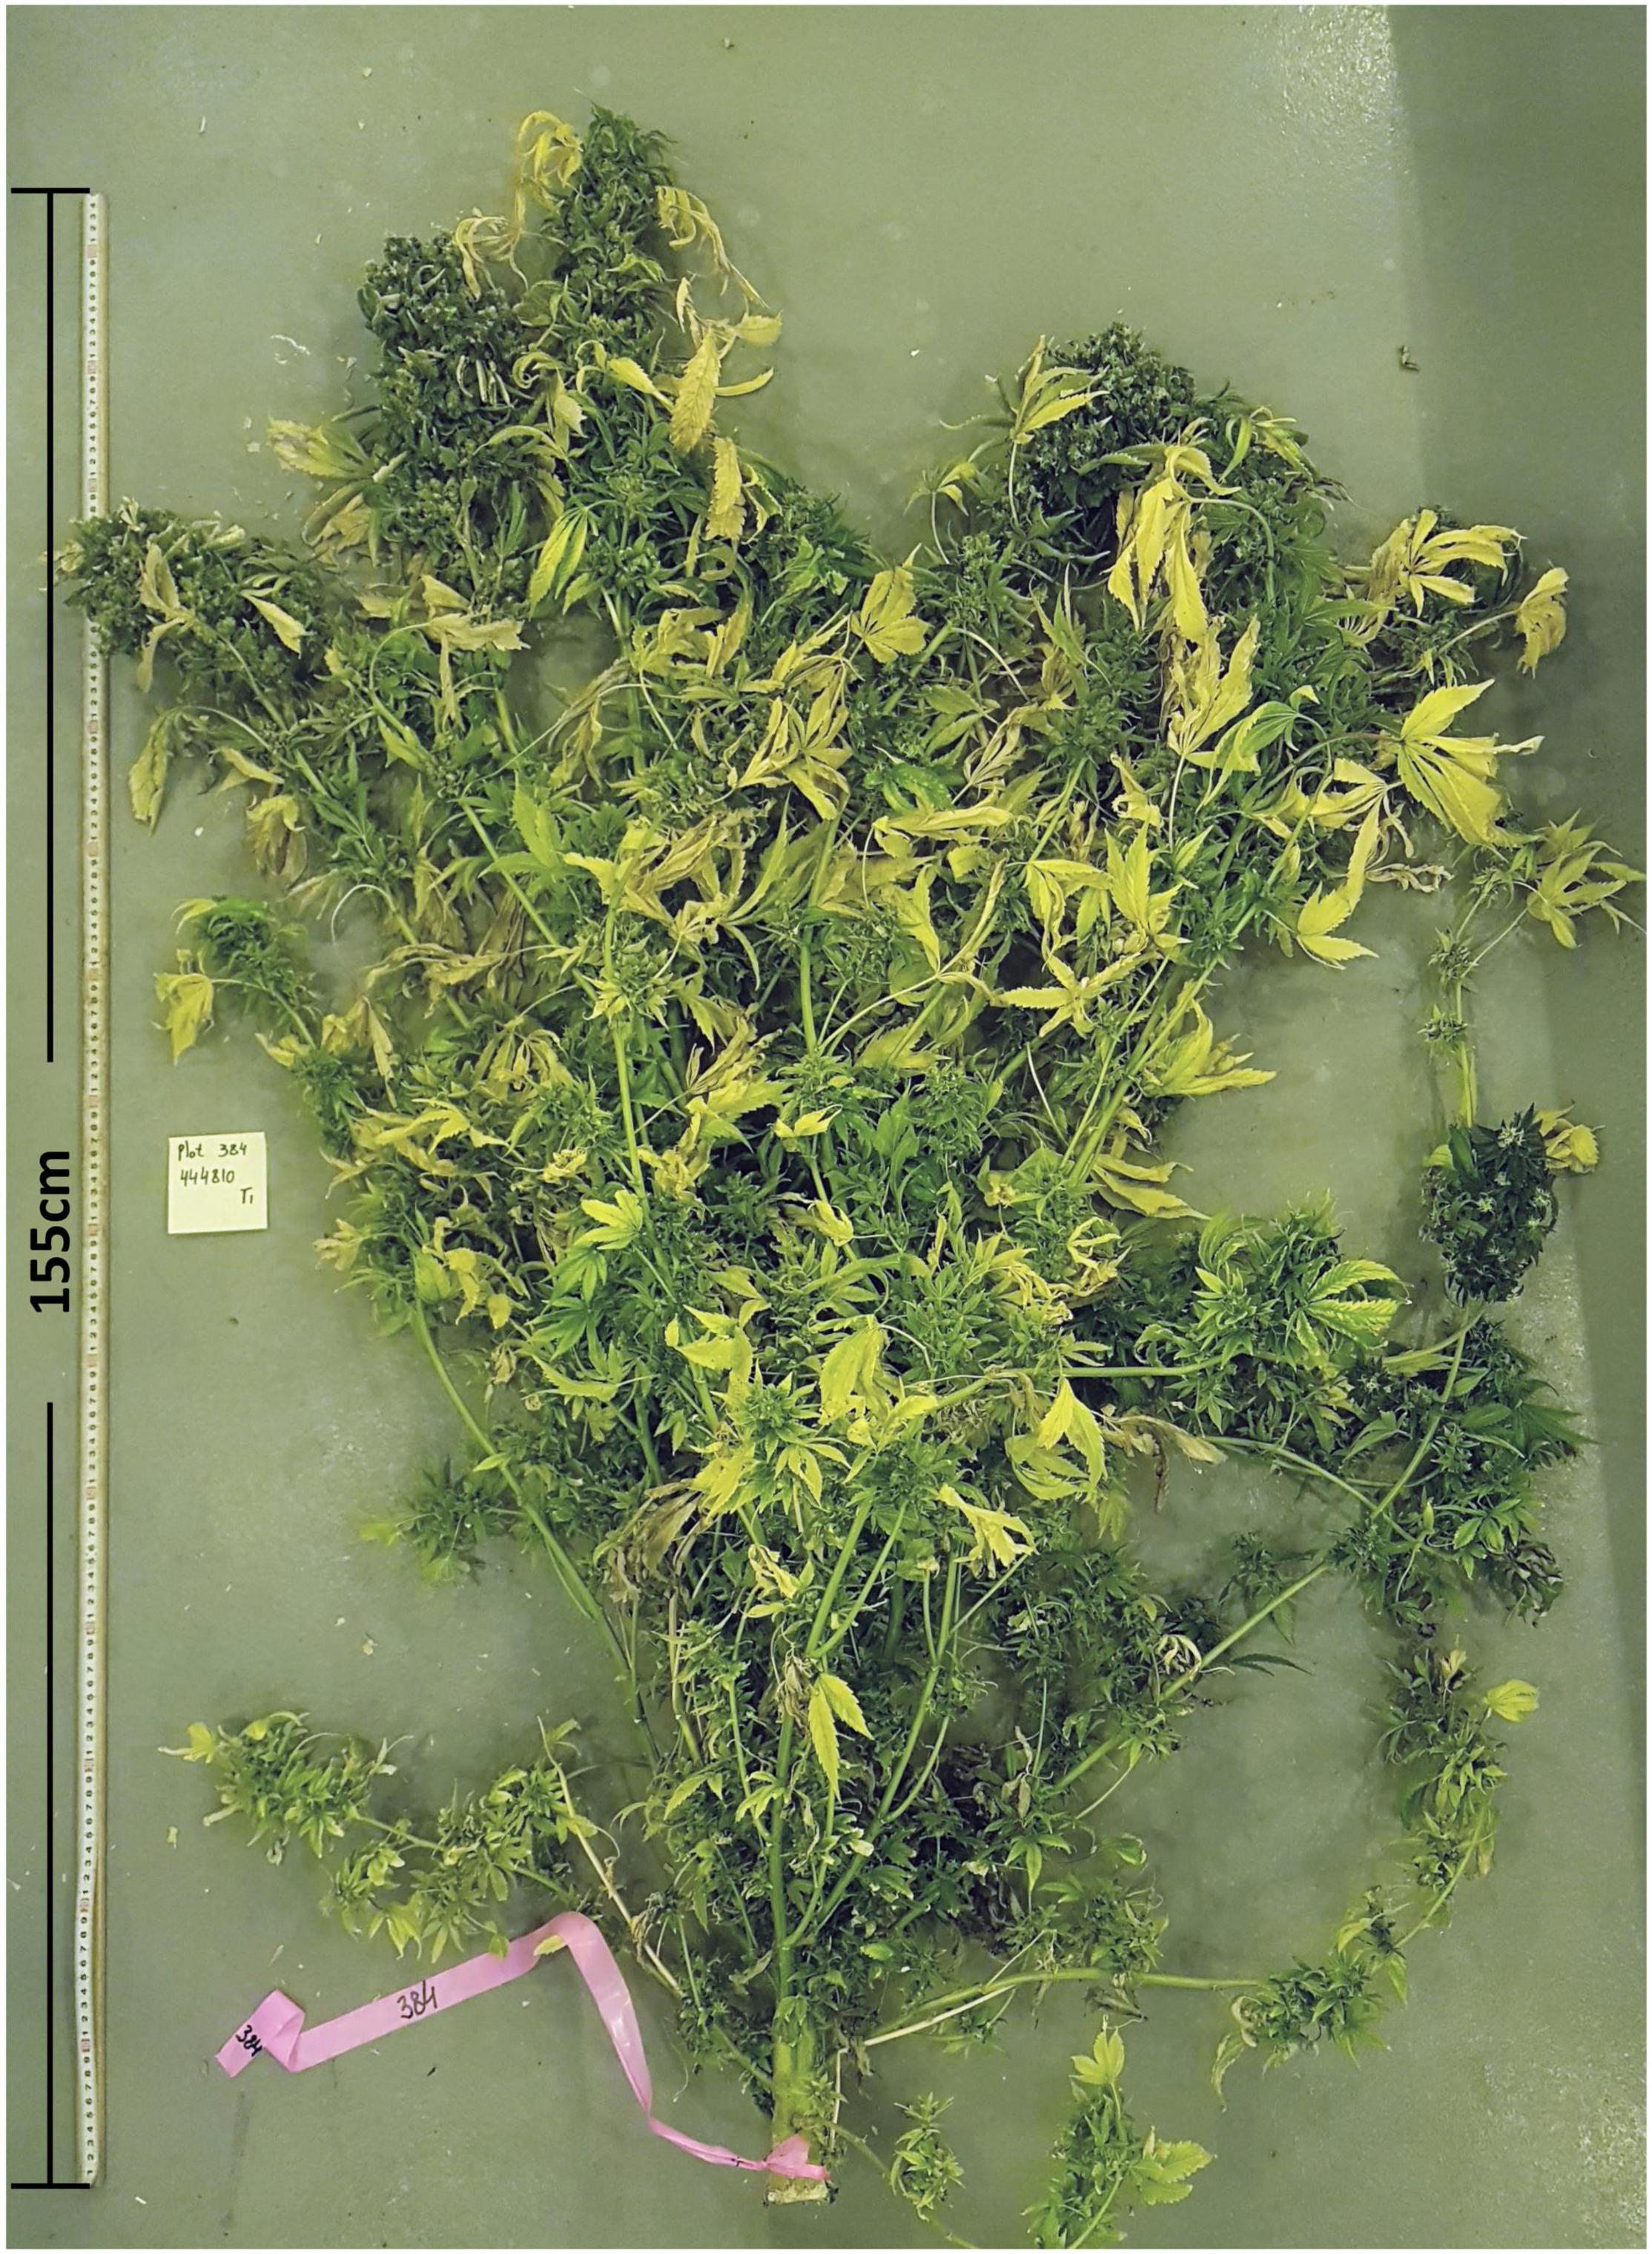 File:24 grams of cannabis buds and digital scale.jpg - Wikimedia Commons